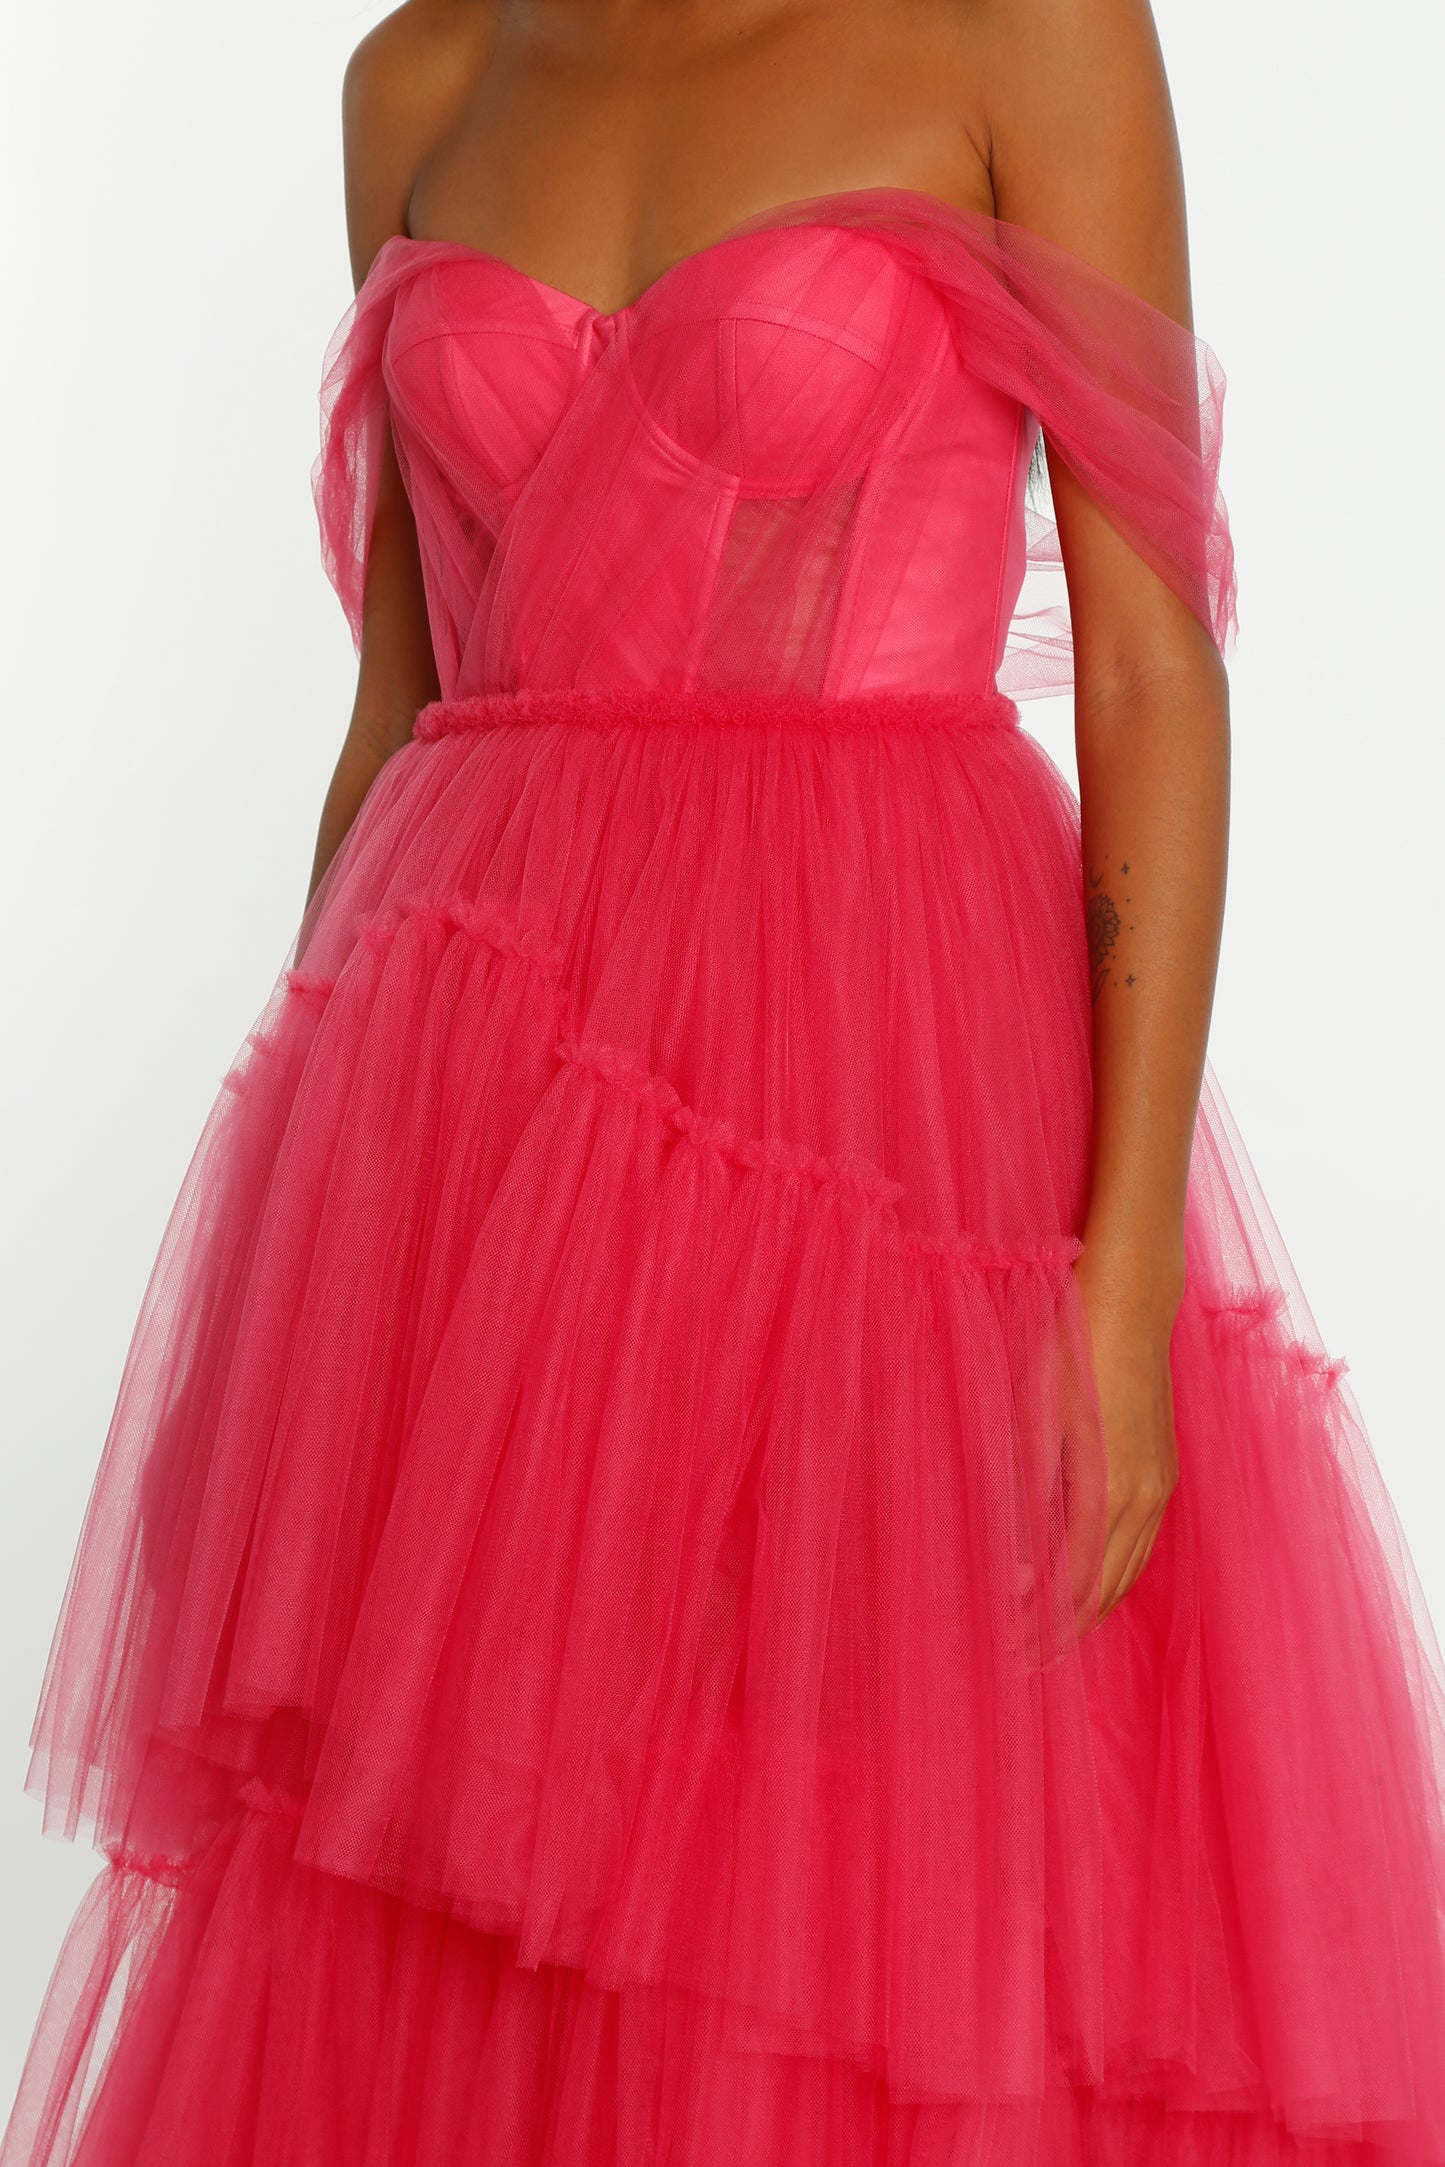 Hot Pink Corseted Tulle Evening Dress